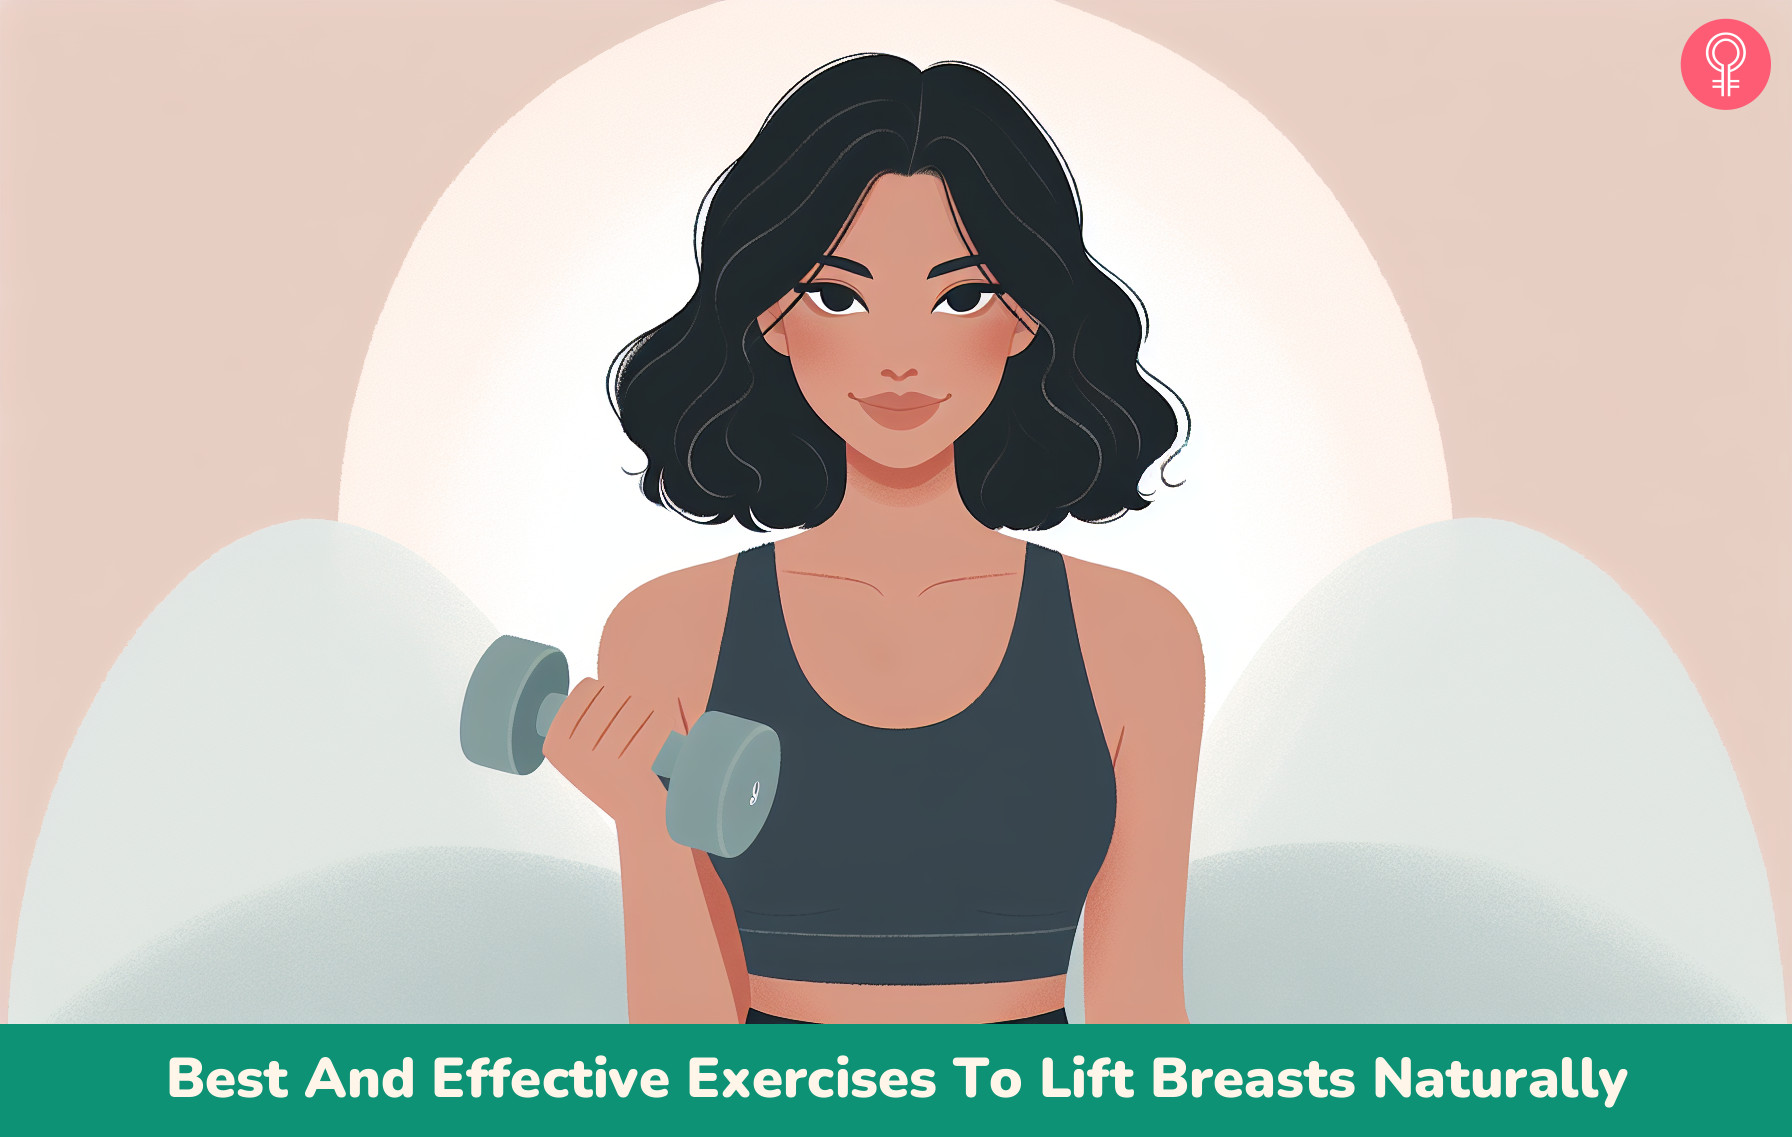 18 Best And Effective Exercises To Lift Breasts Naturally